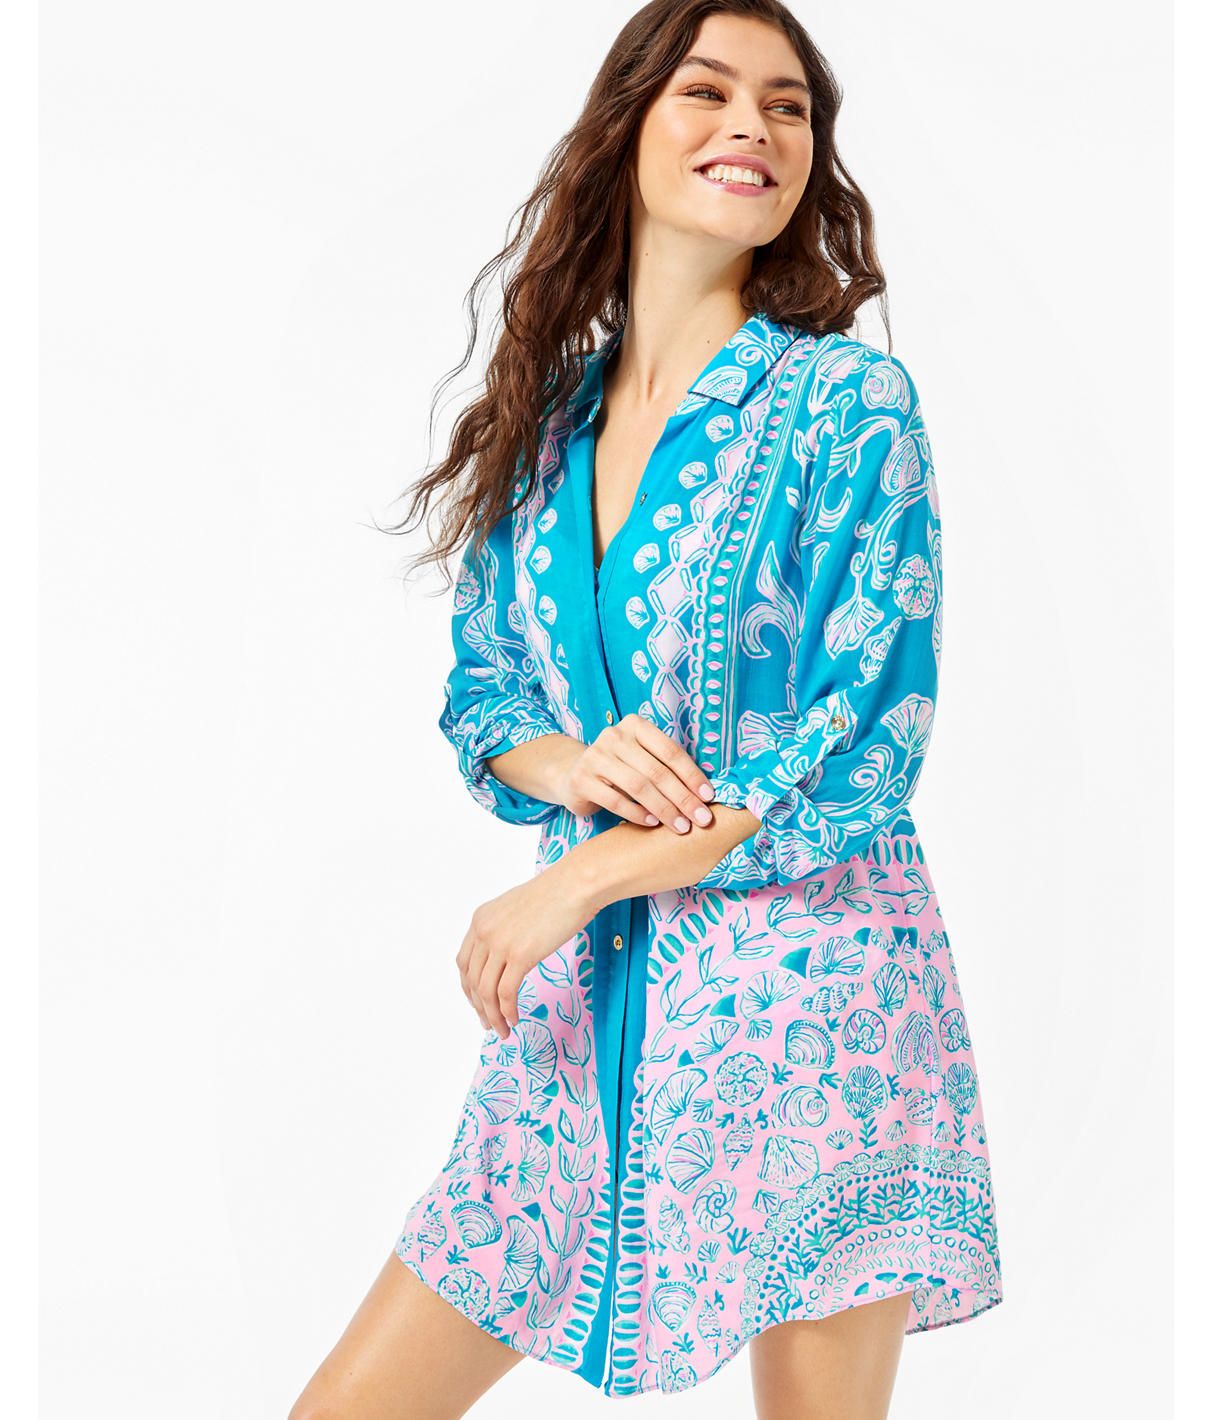 Lilly Pulitzer Natalie Cover-Up | Lilly Pulitzer